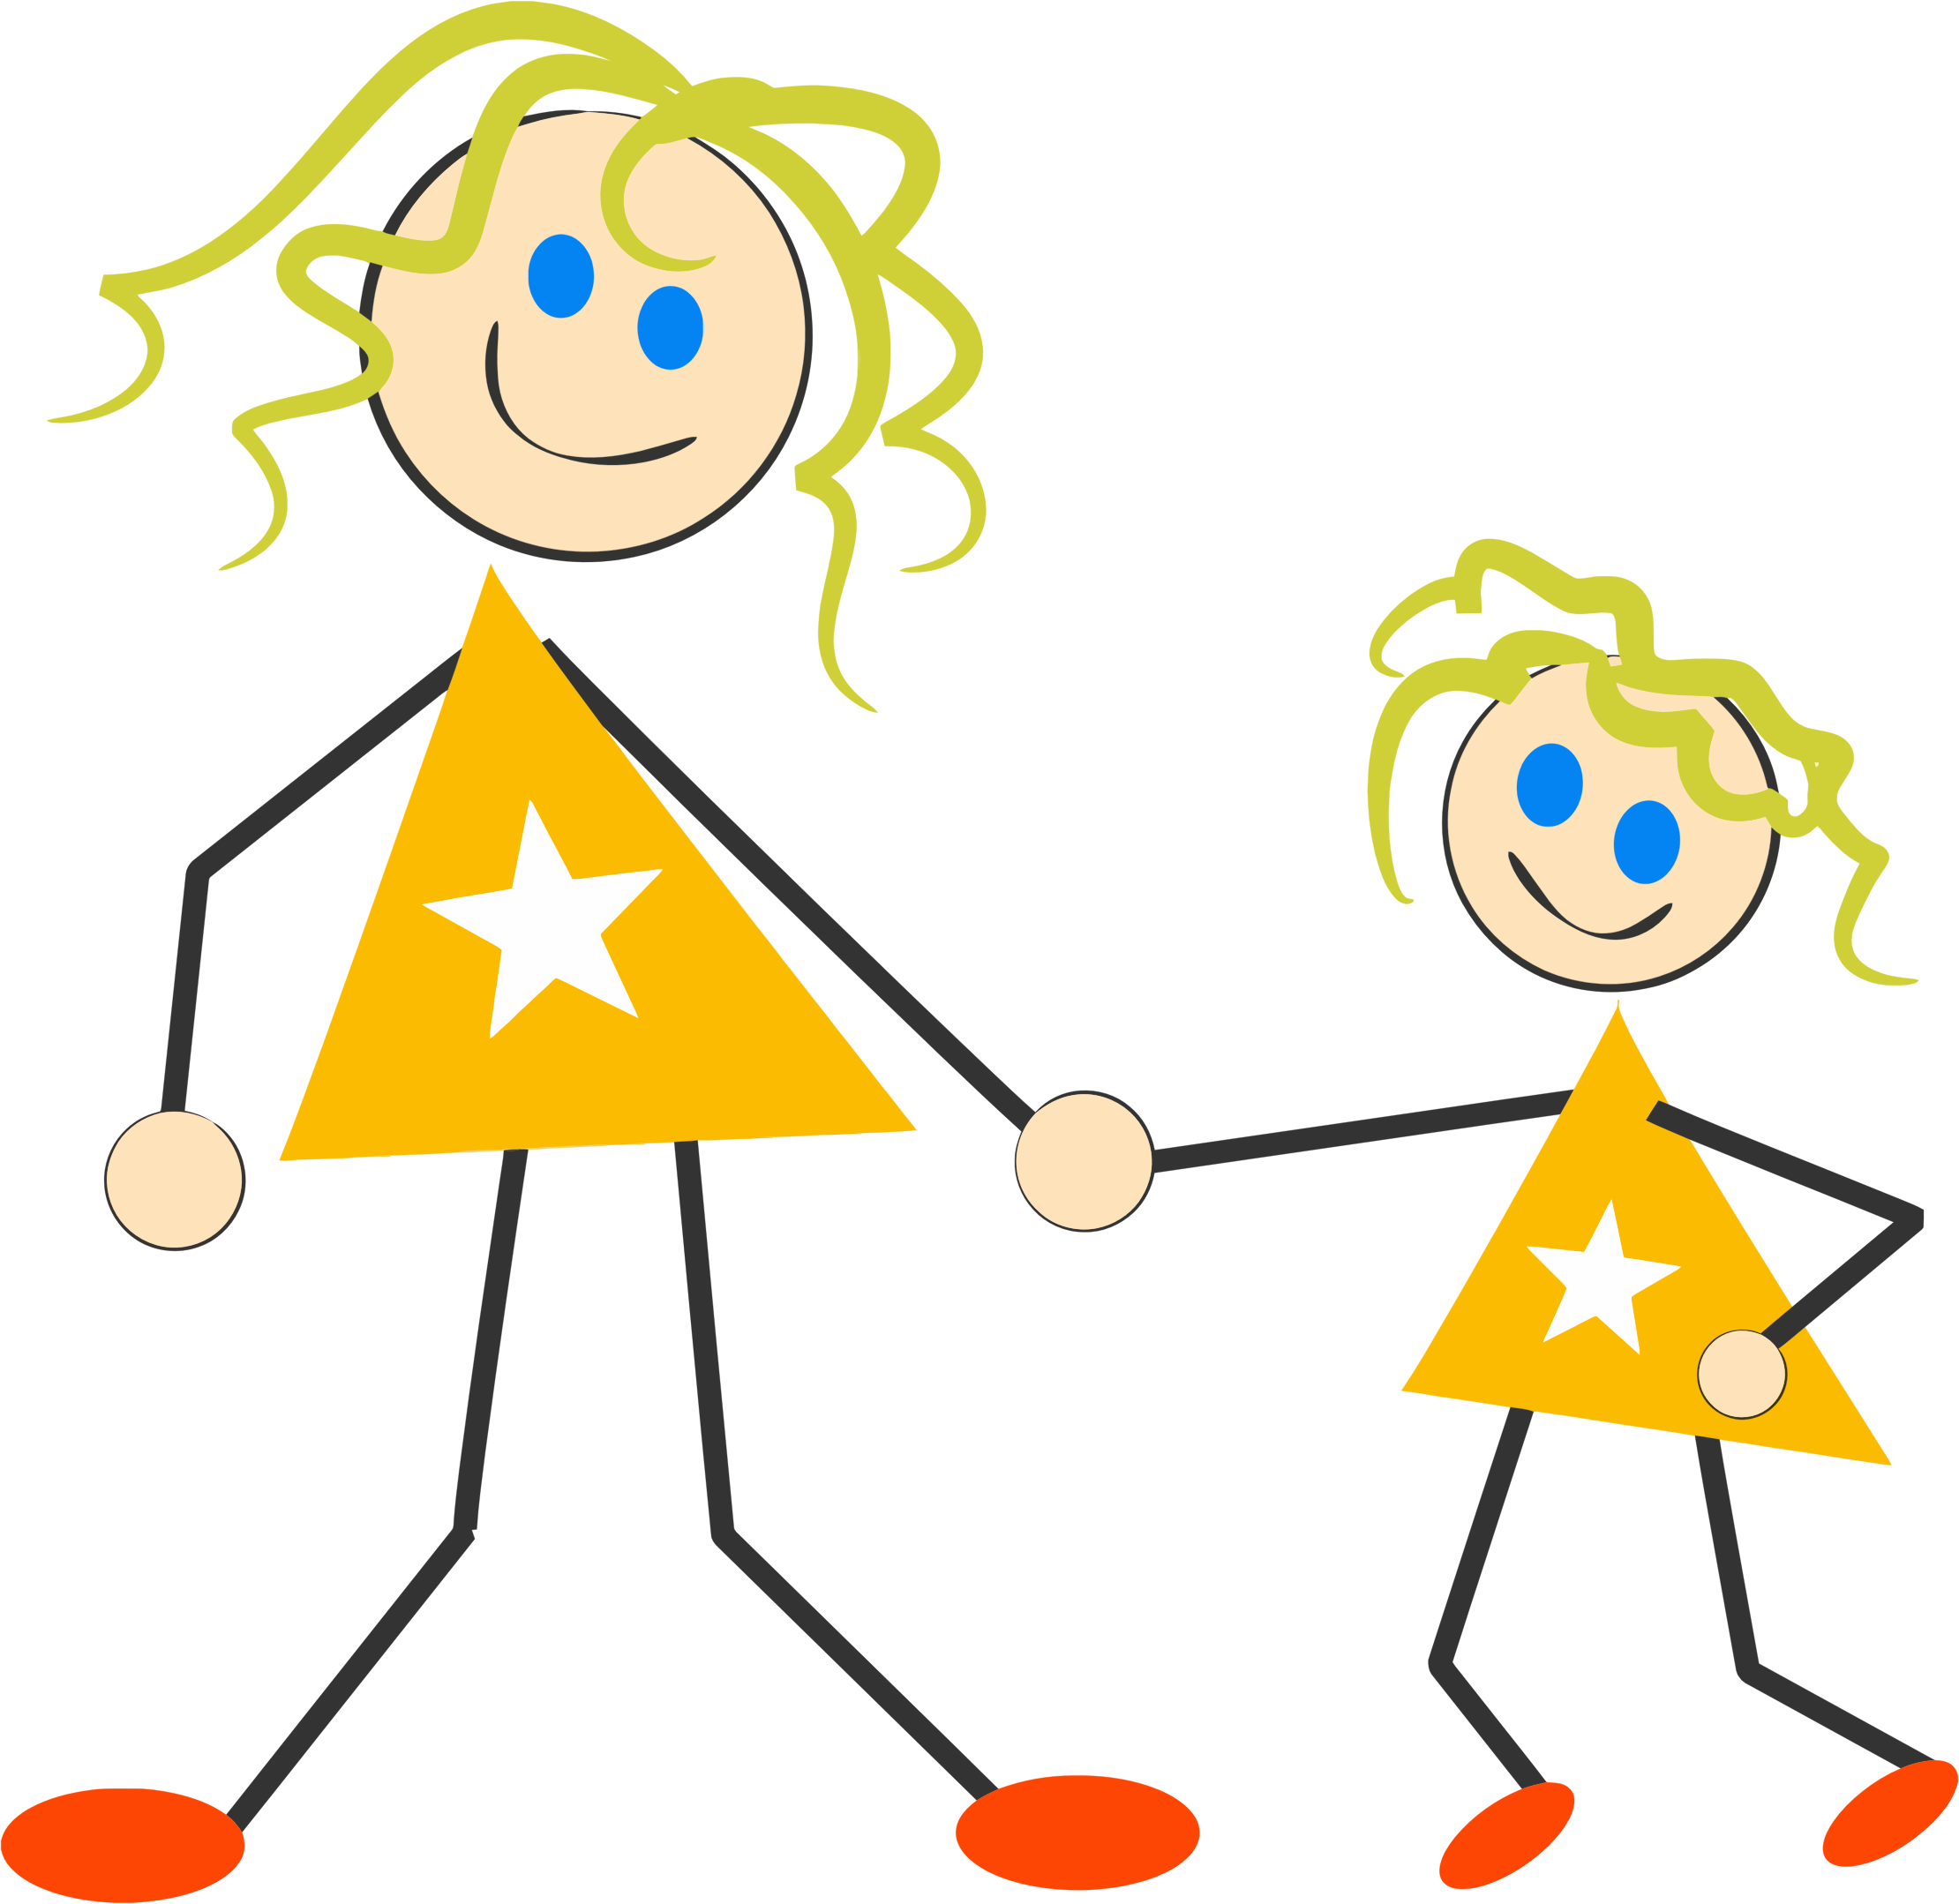 A Cartoon Of A Woman And A Child Holding Hands